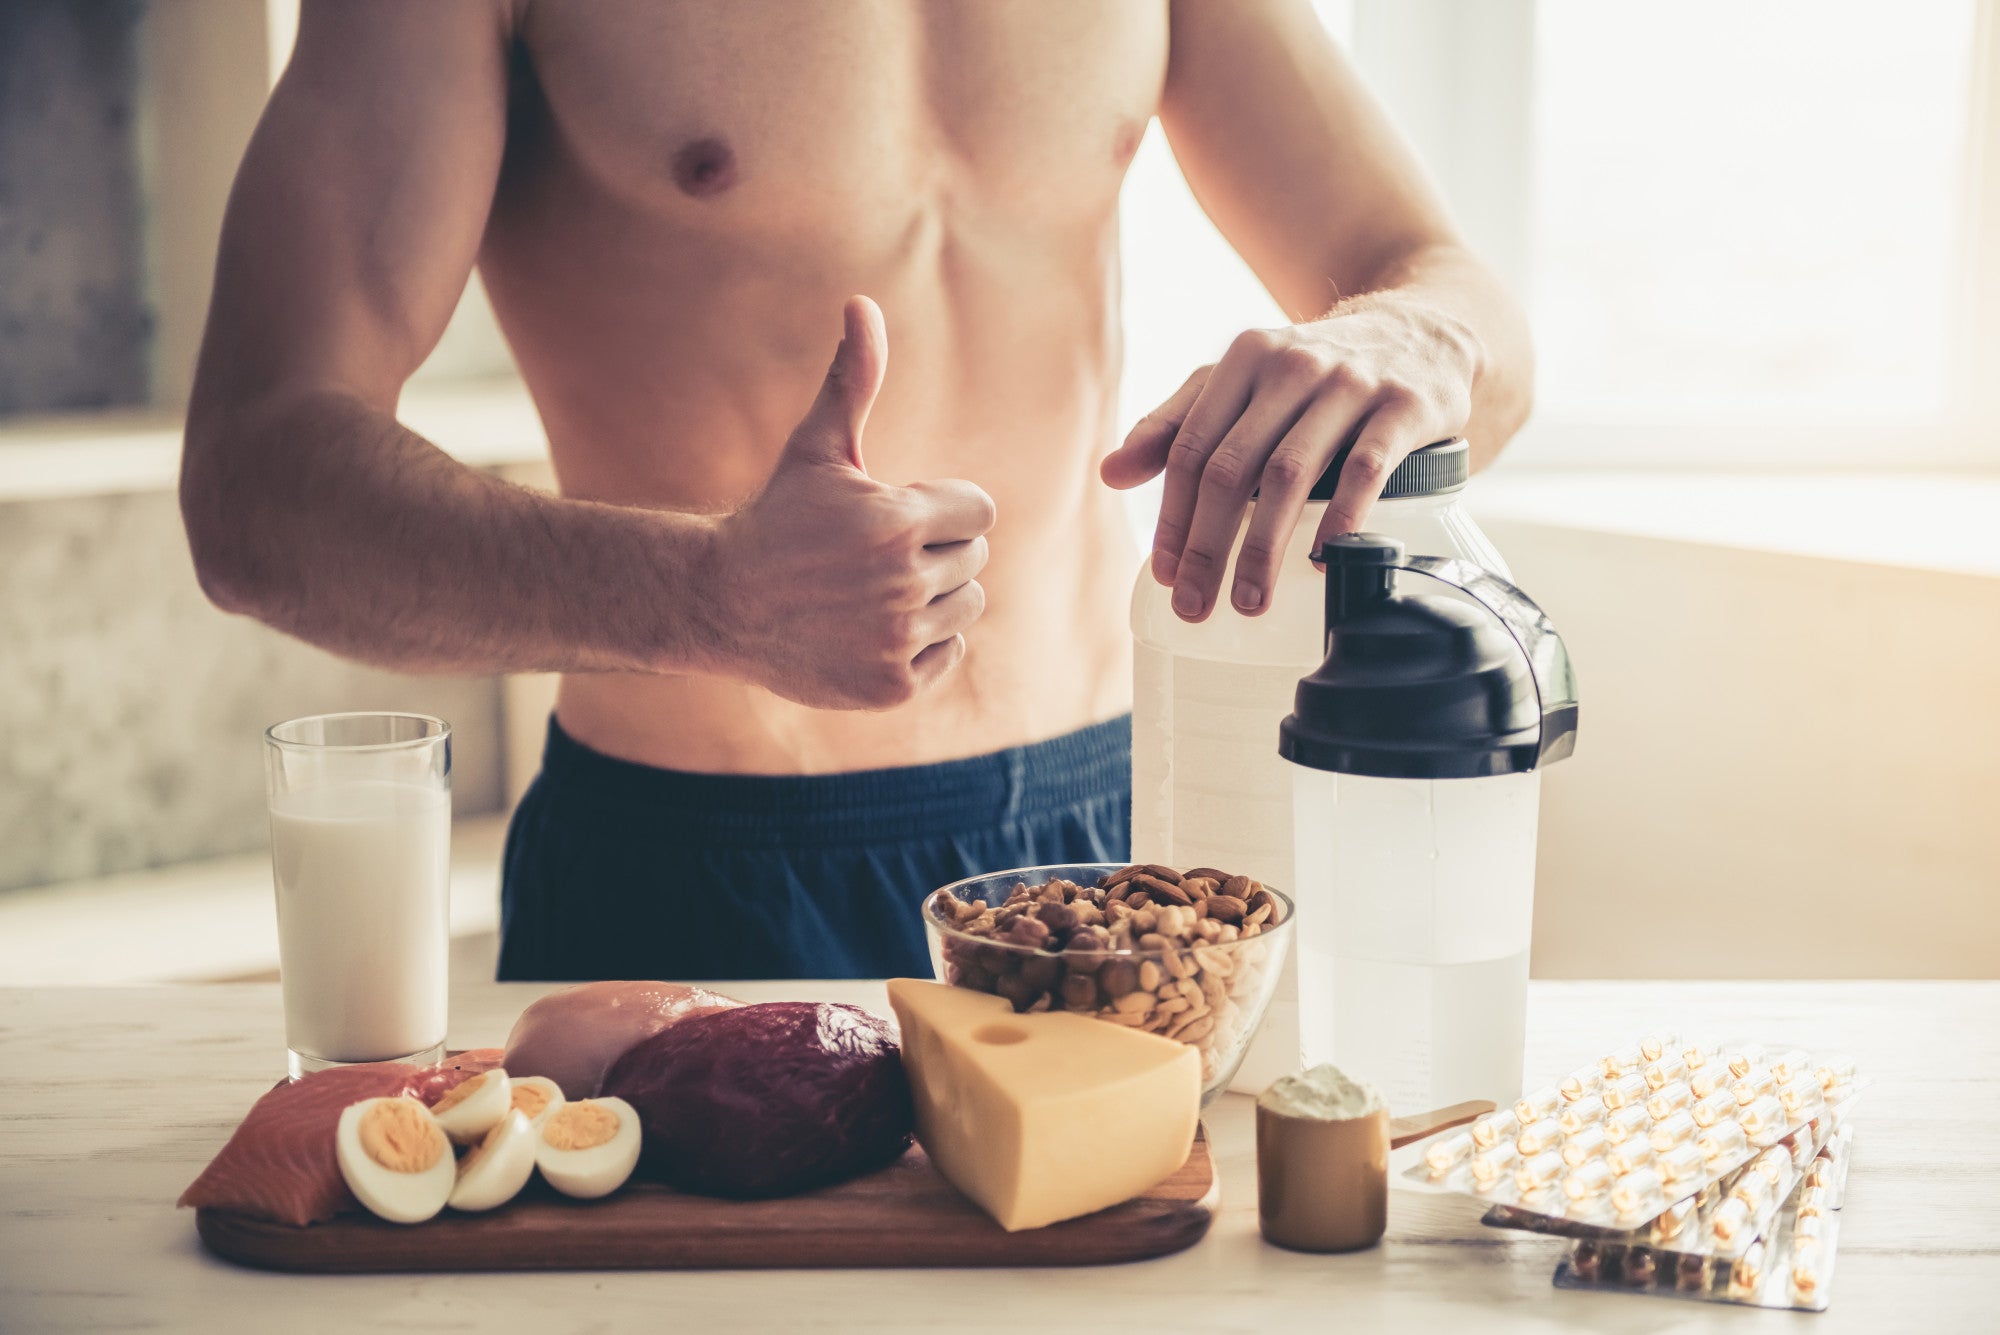 What Should You Eat When Trying to Gain Muscle?